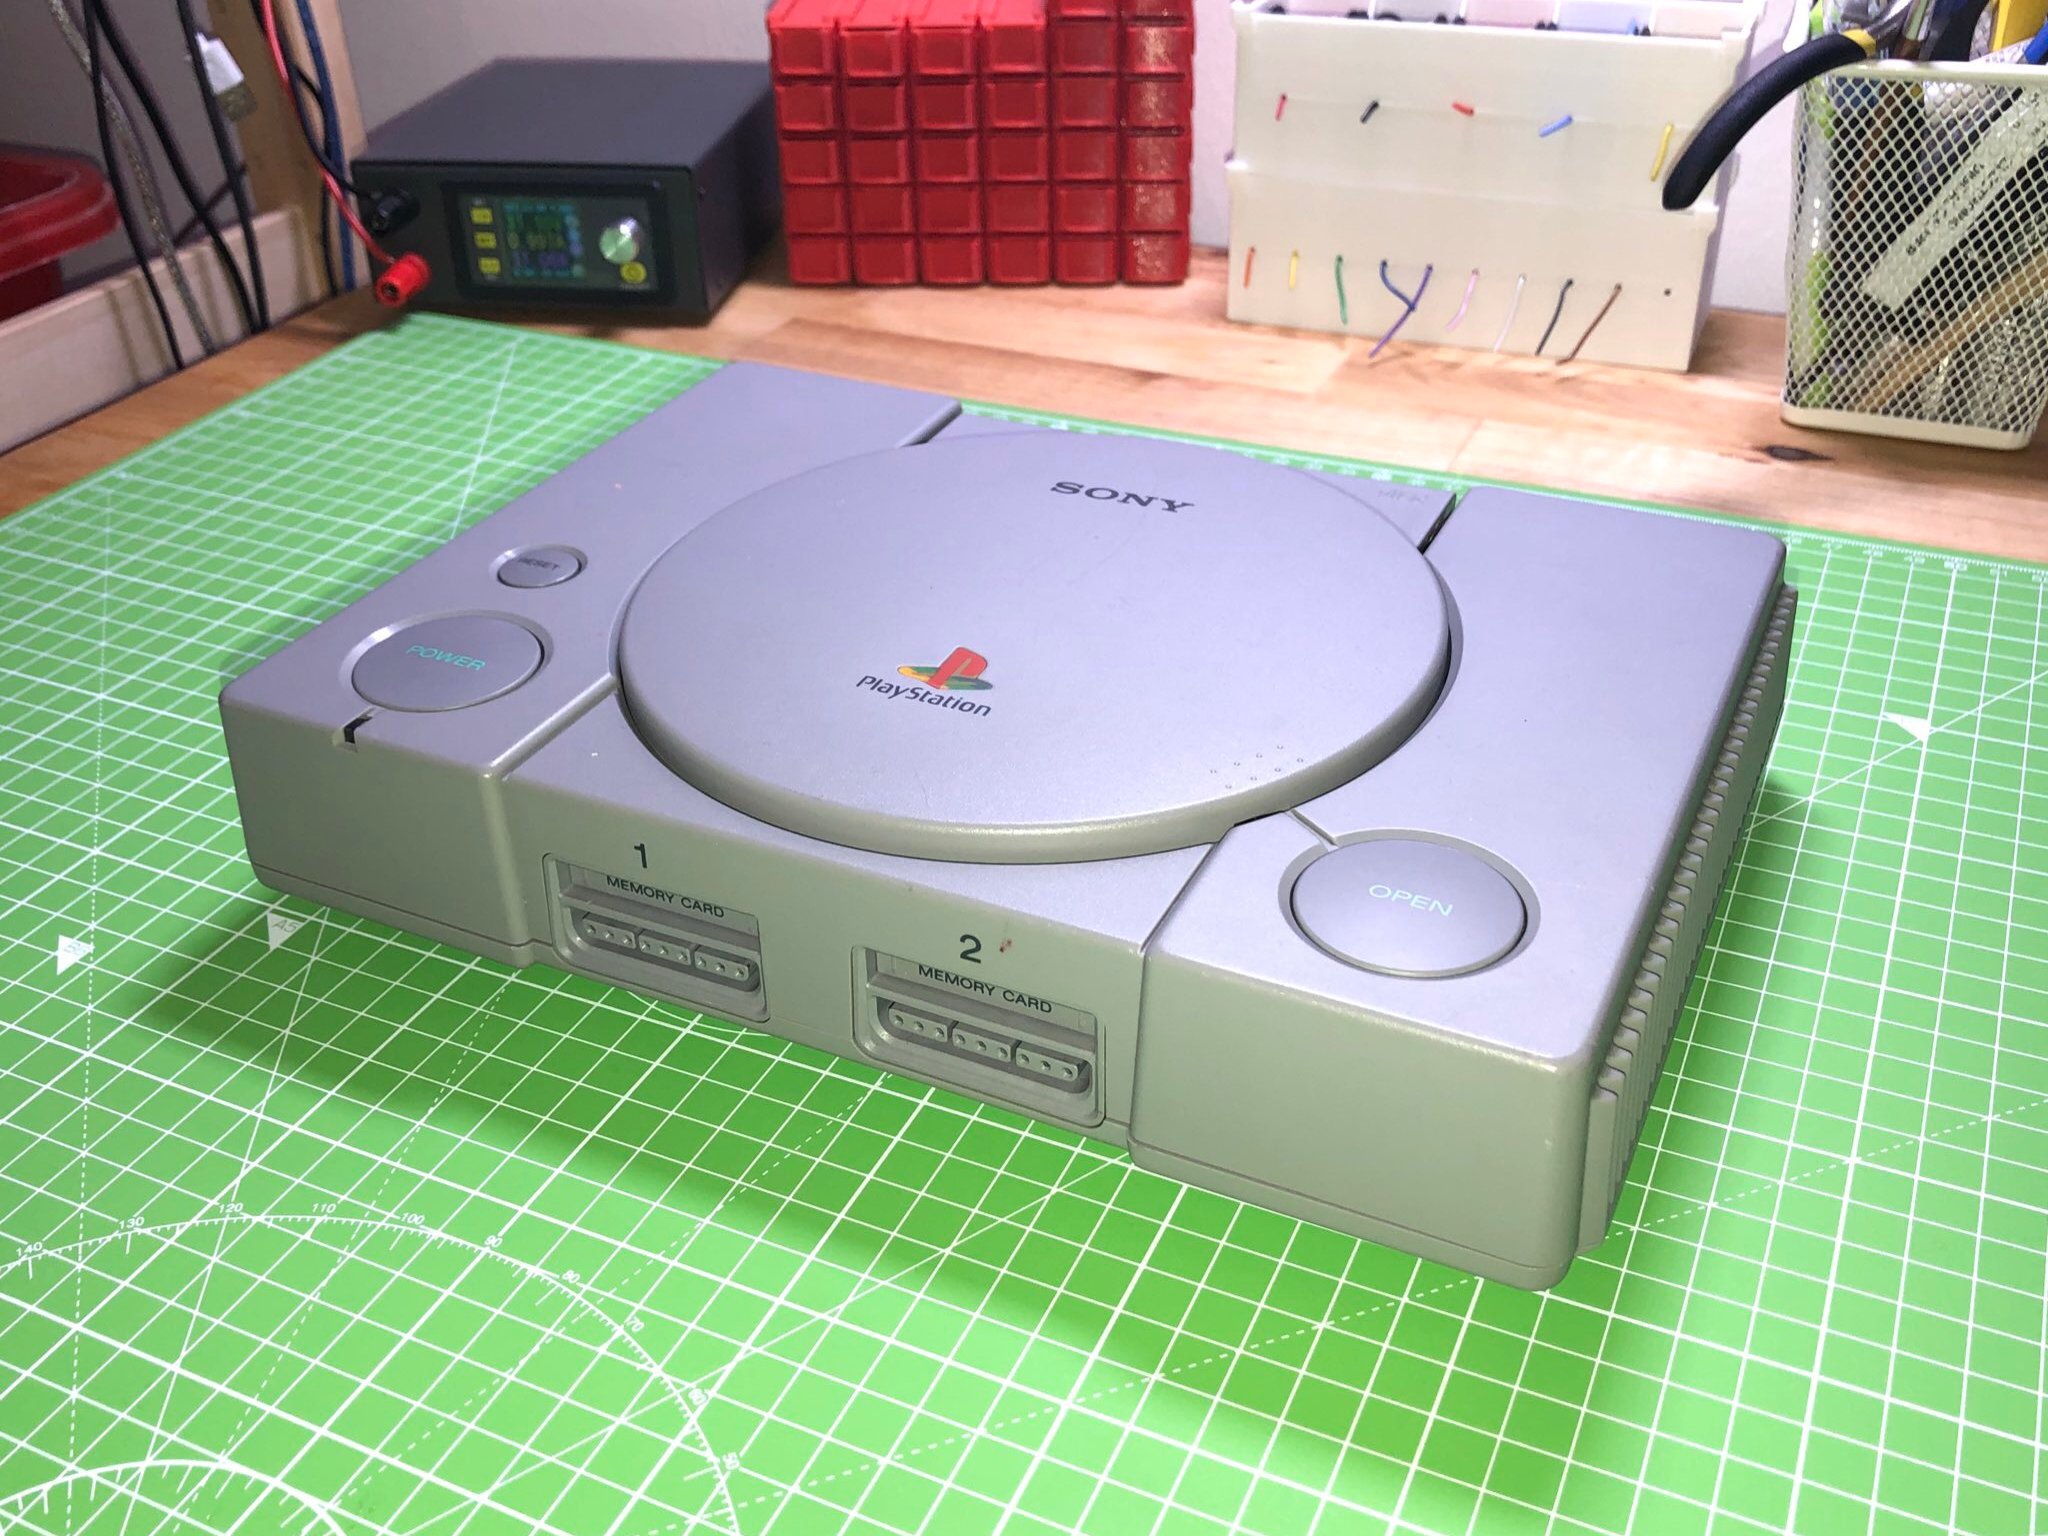 ps4 in ps1 case